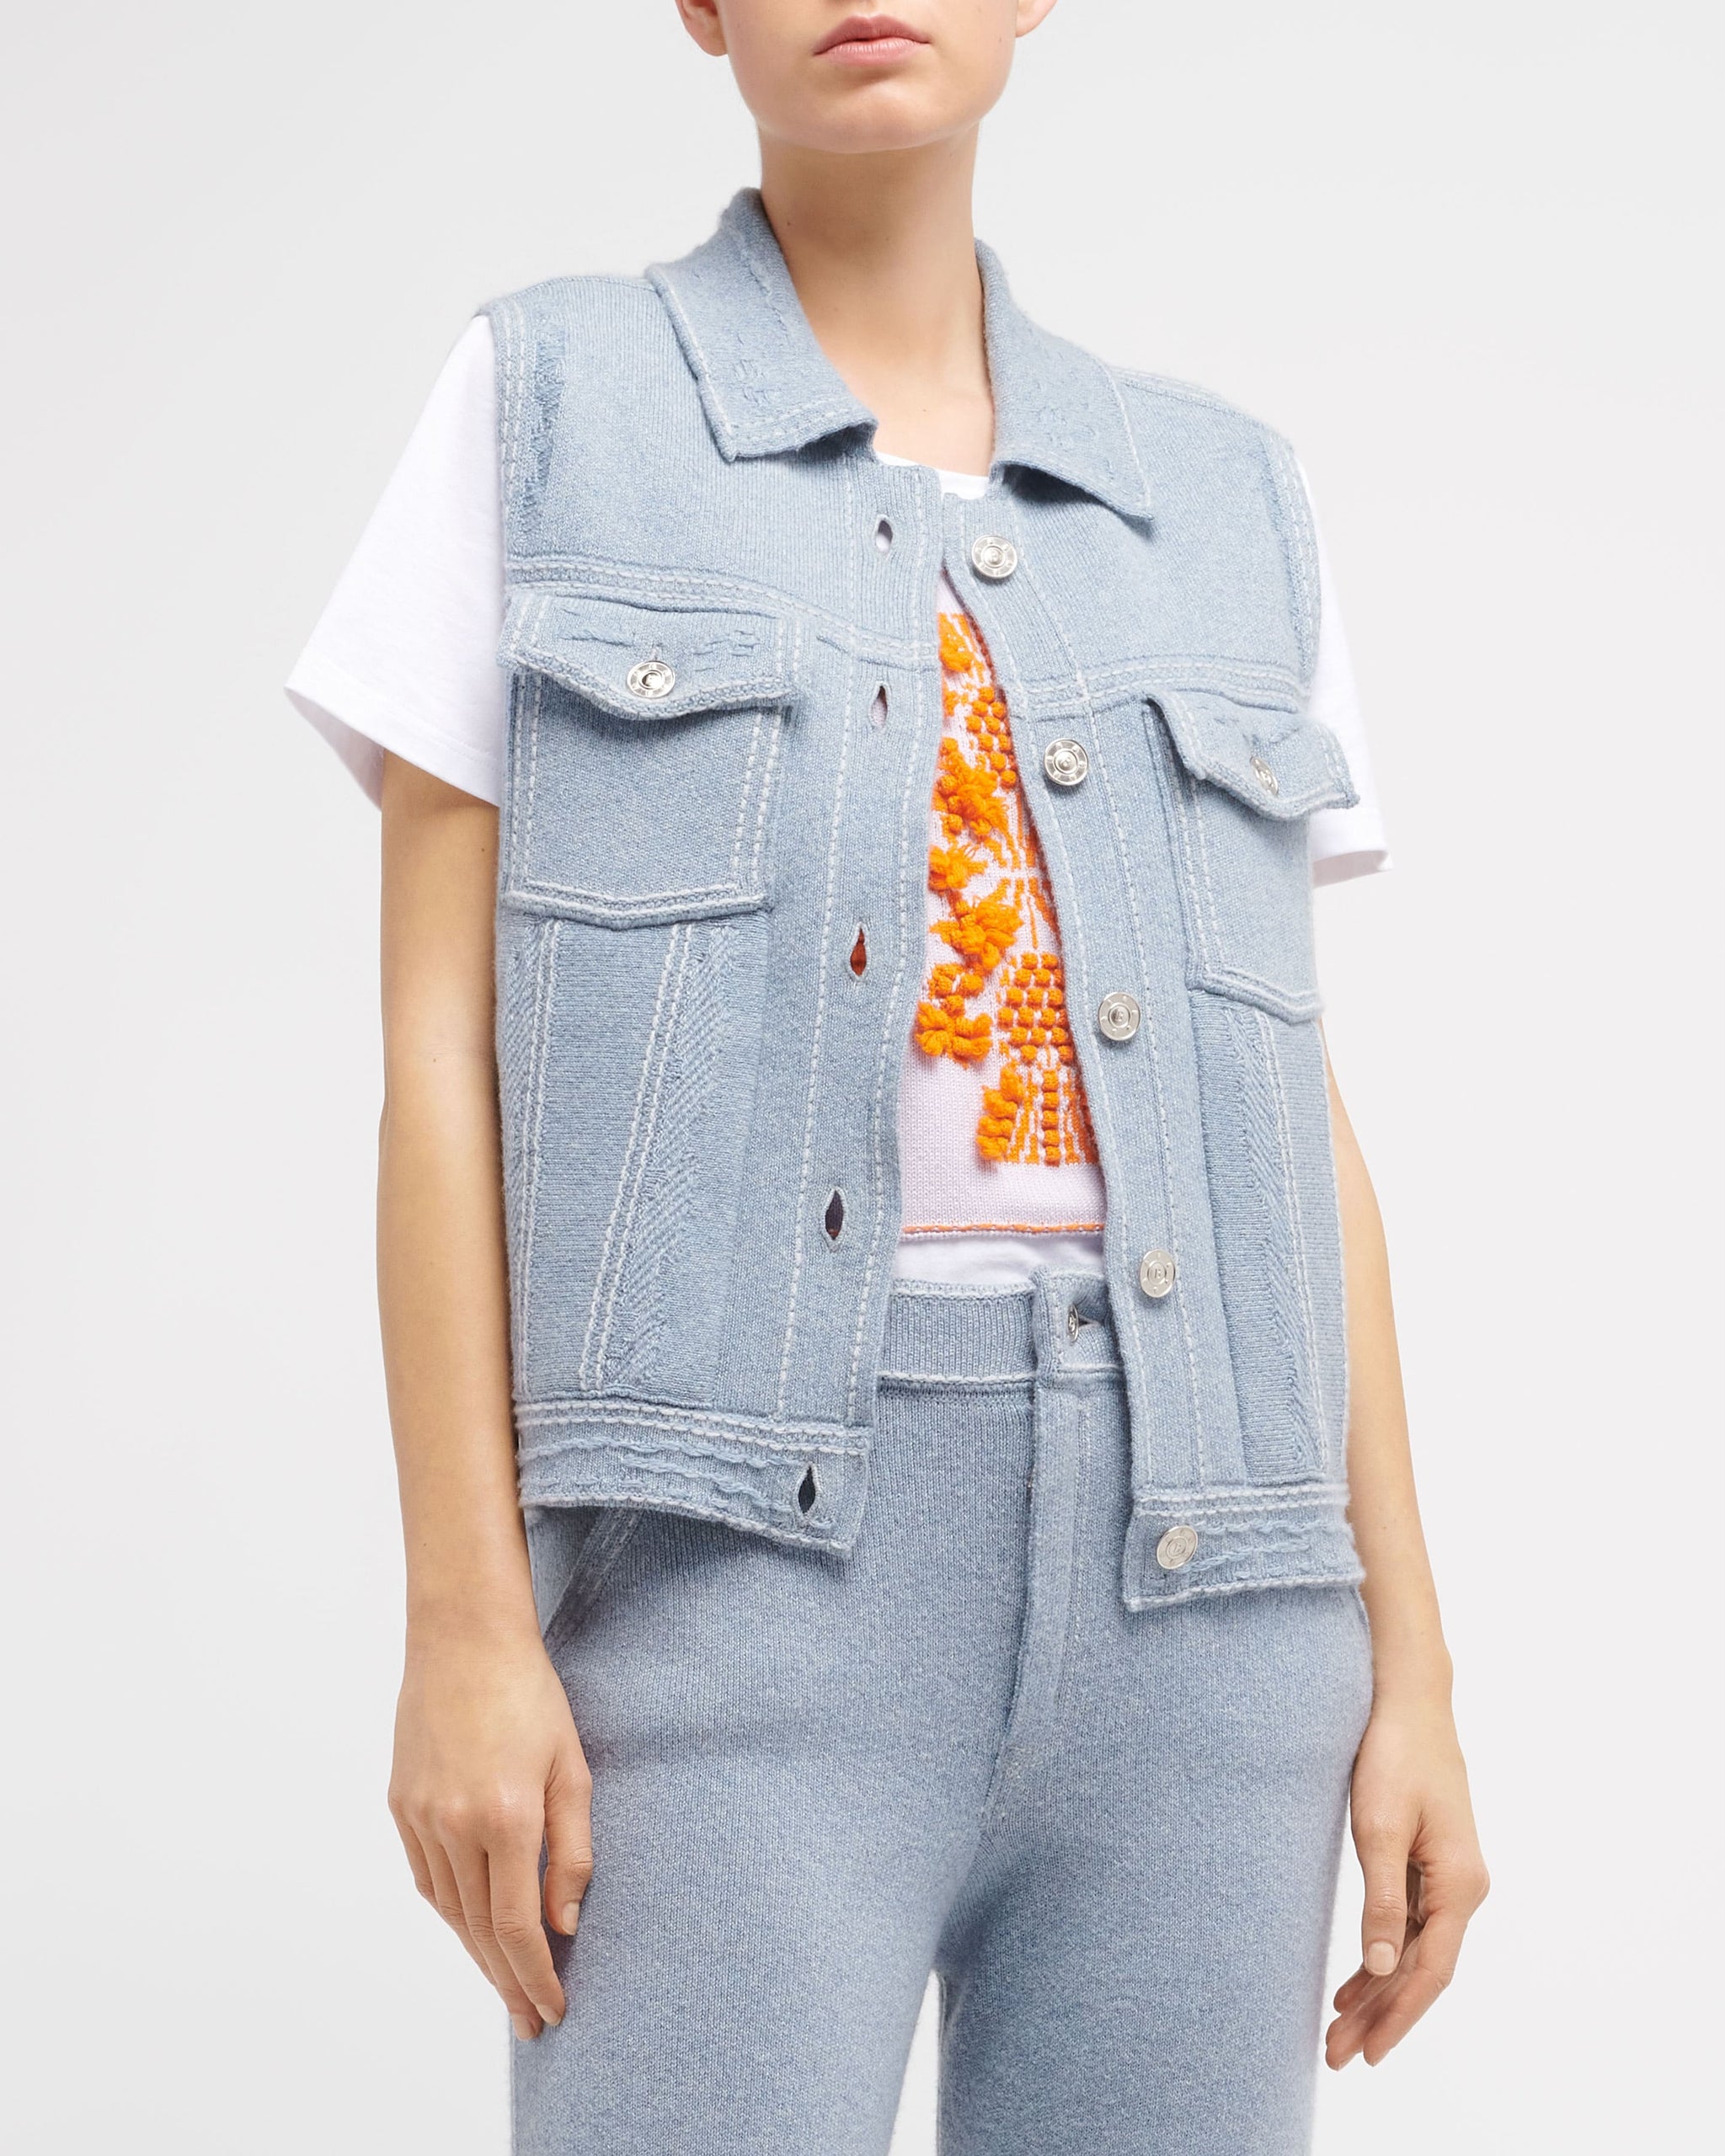 Oversized sleeveless denim jacket in cashmere and cotton – Barrie.com